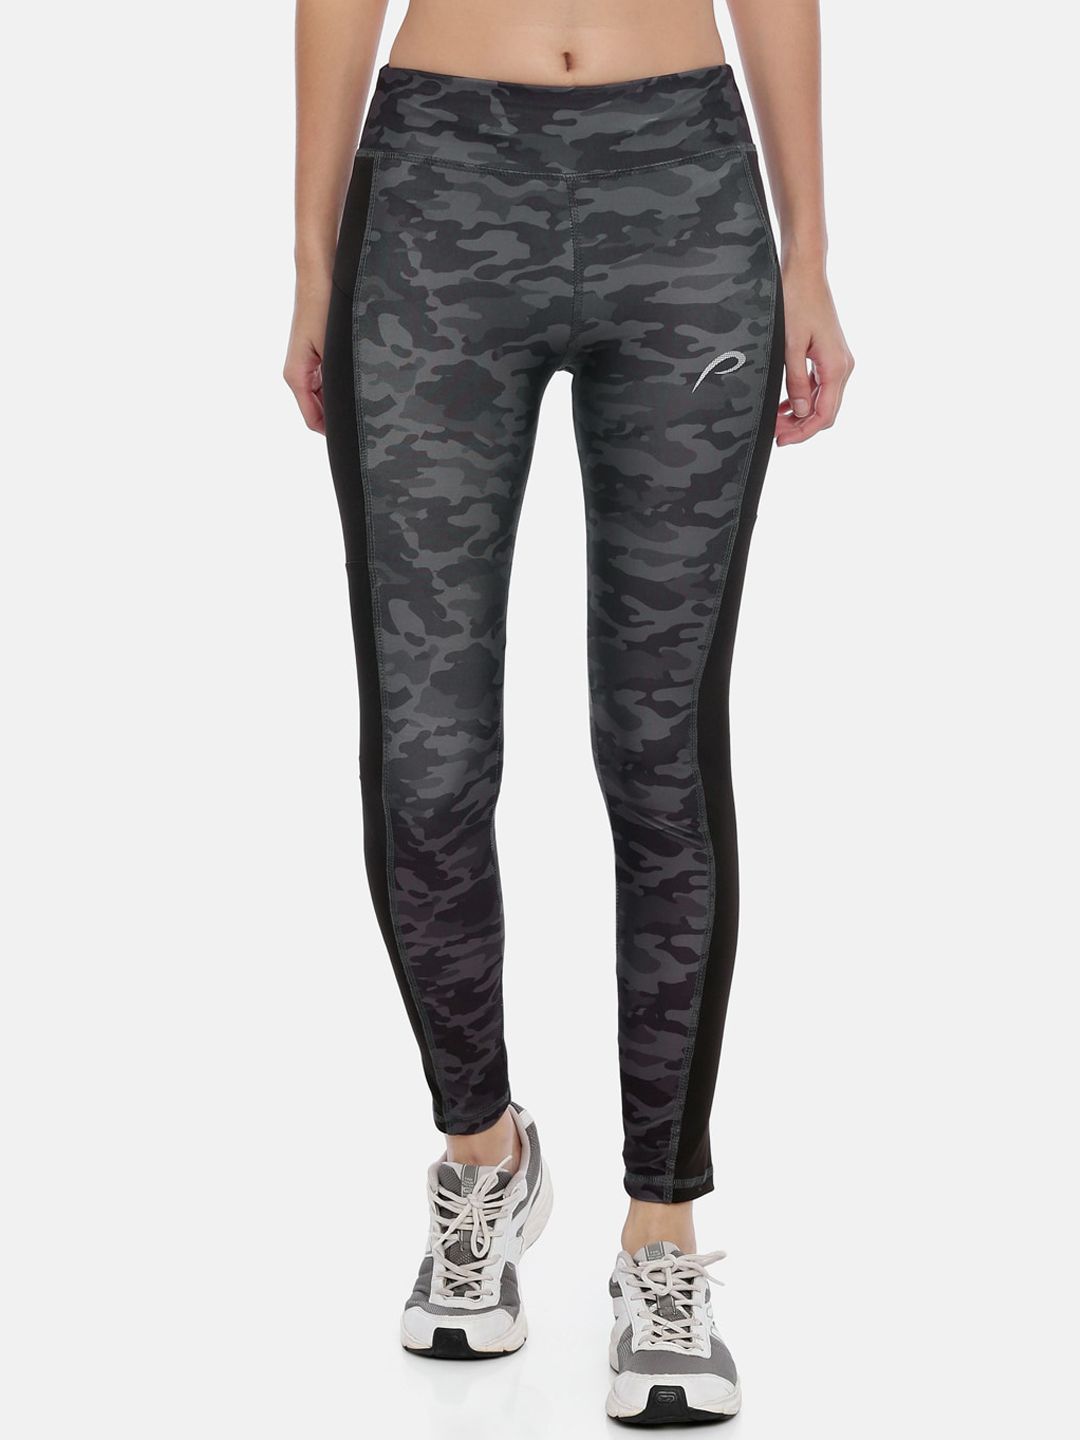 Proline Women Grey & Black Camouflage Printed Sports Joggers Price in India